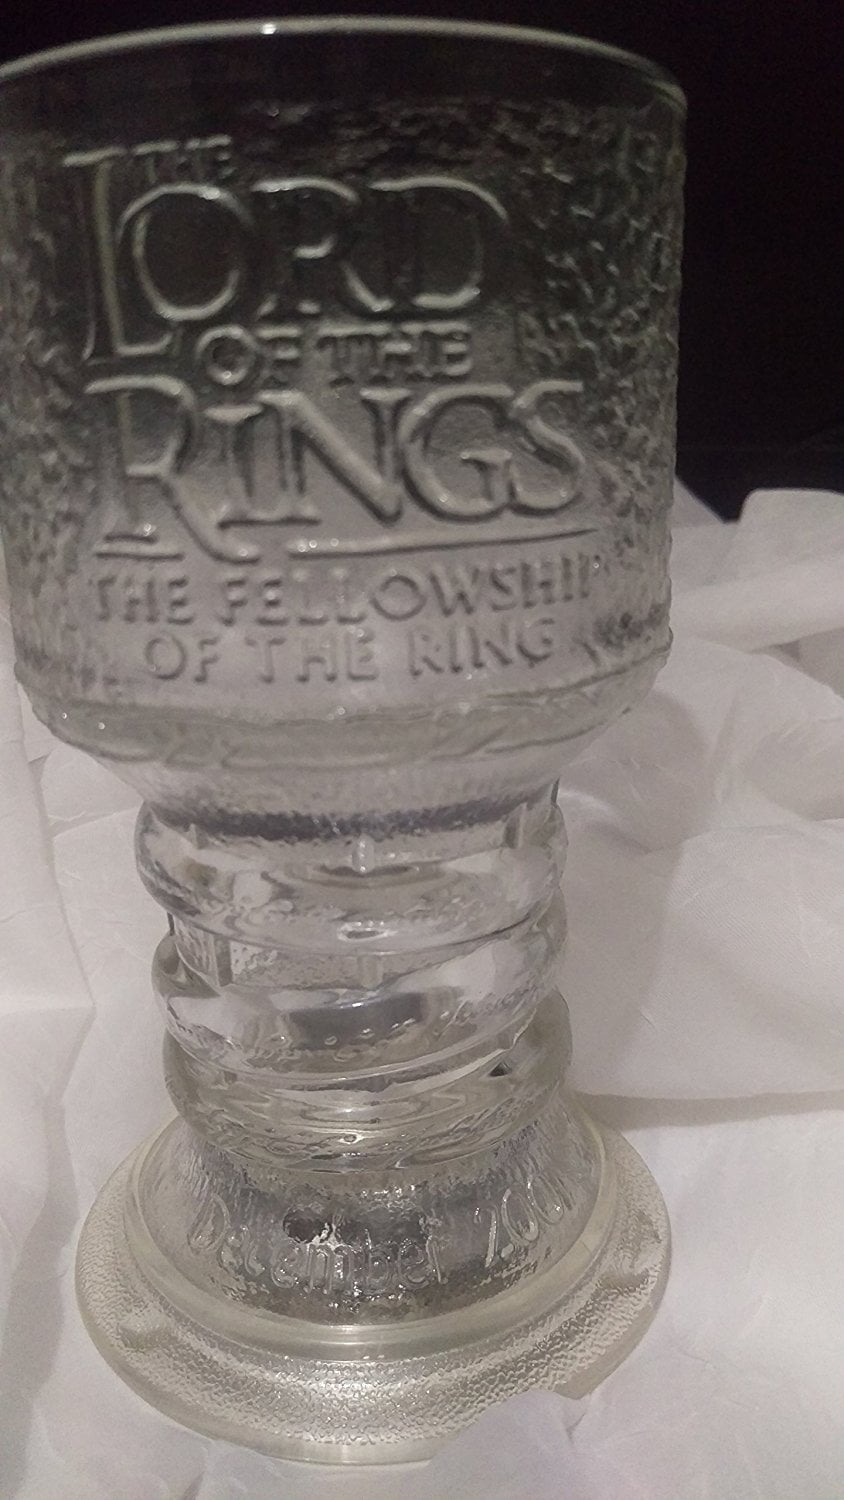 The Lord of the Rings The Fellowship of the Ring Gandalf Glass Goblet Dec 2001